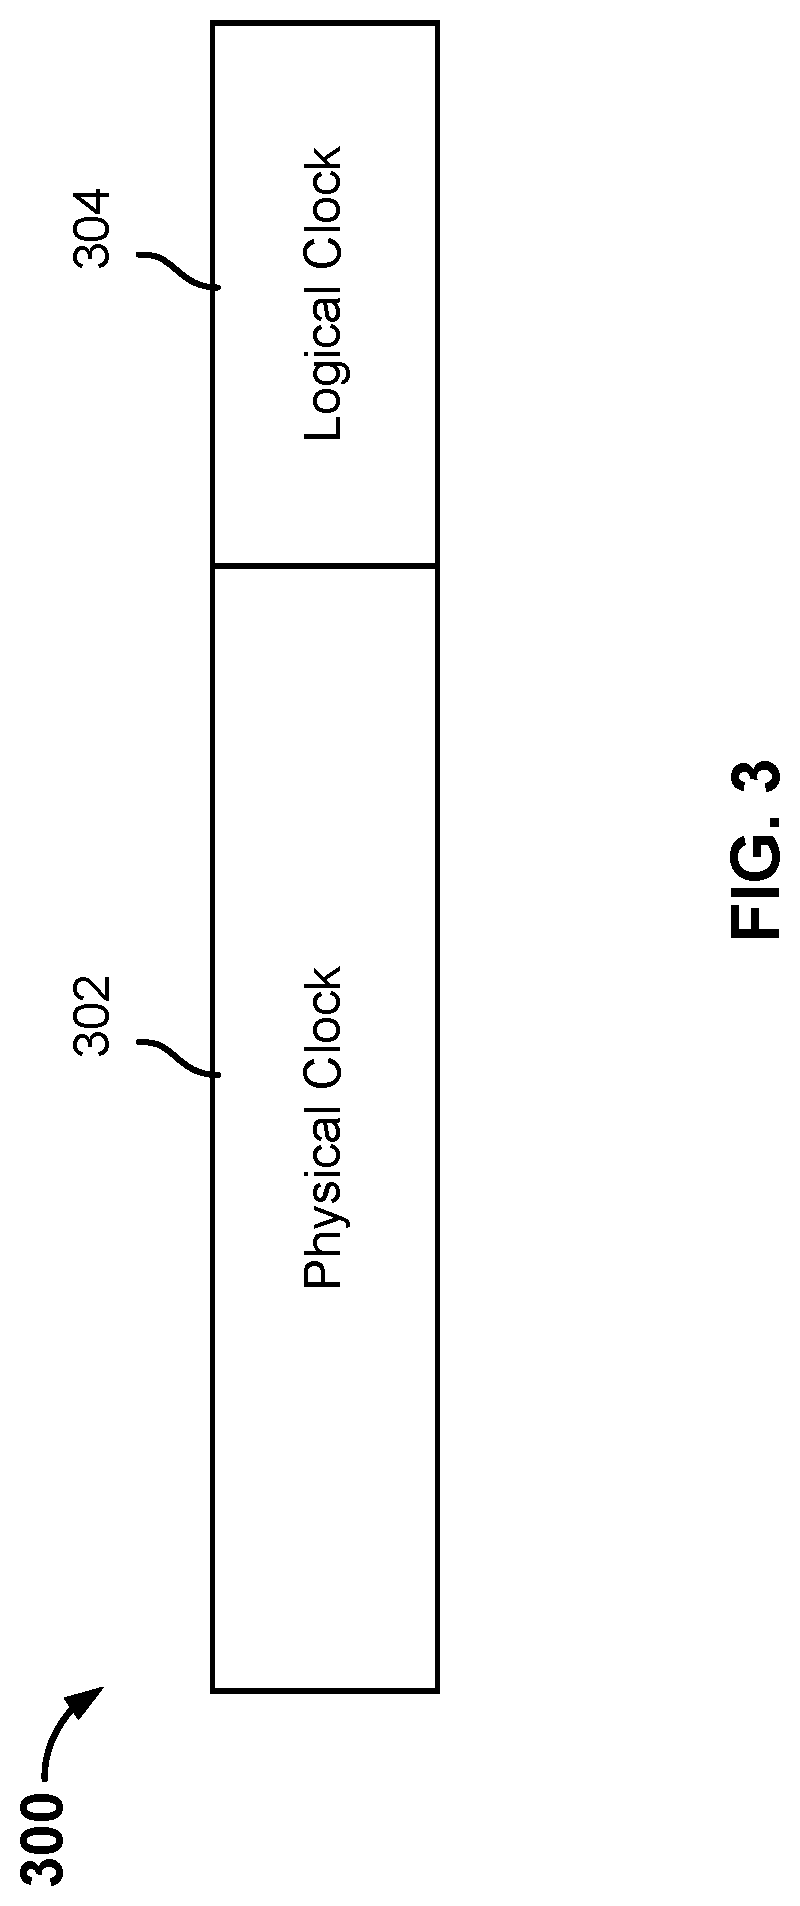 Transaction processing for a database distributed across availability zones